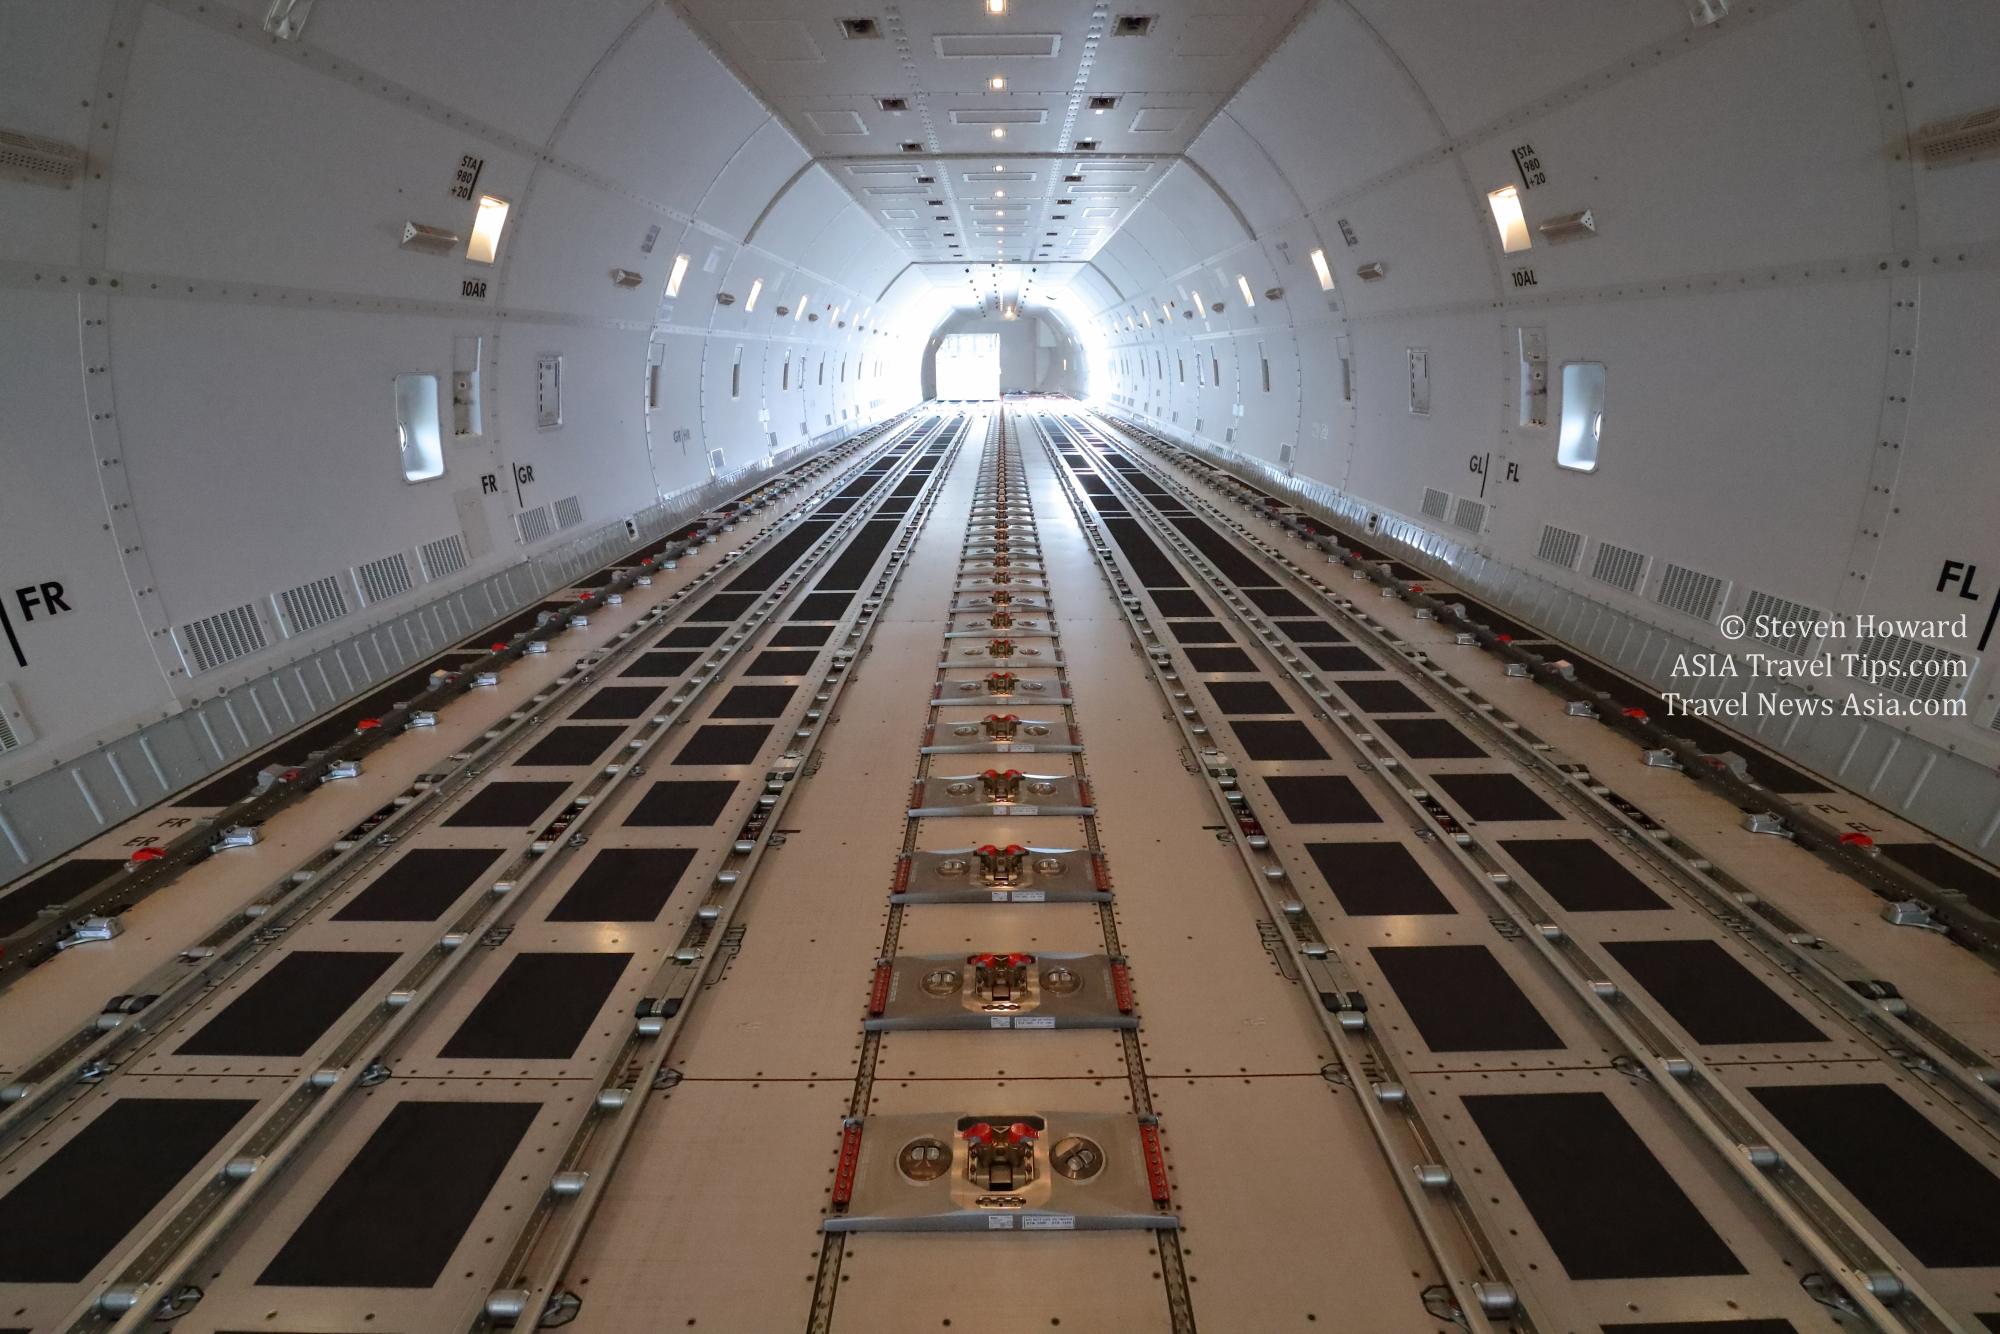 Inside a Qatar Airways Boeing 747 Freighter. Picture by Steven Howard of TravelNewsAsia.com Click to enlarge.